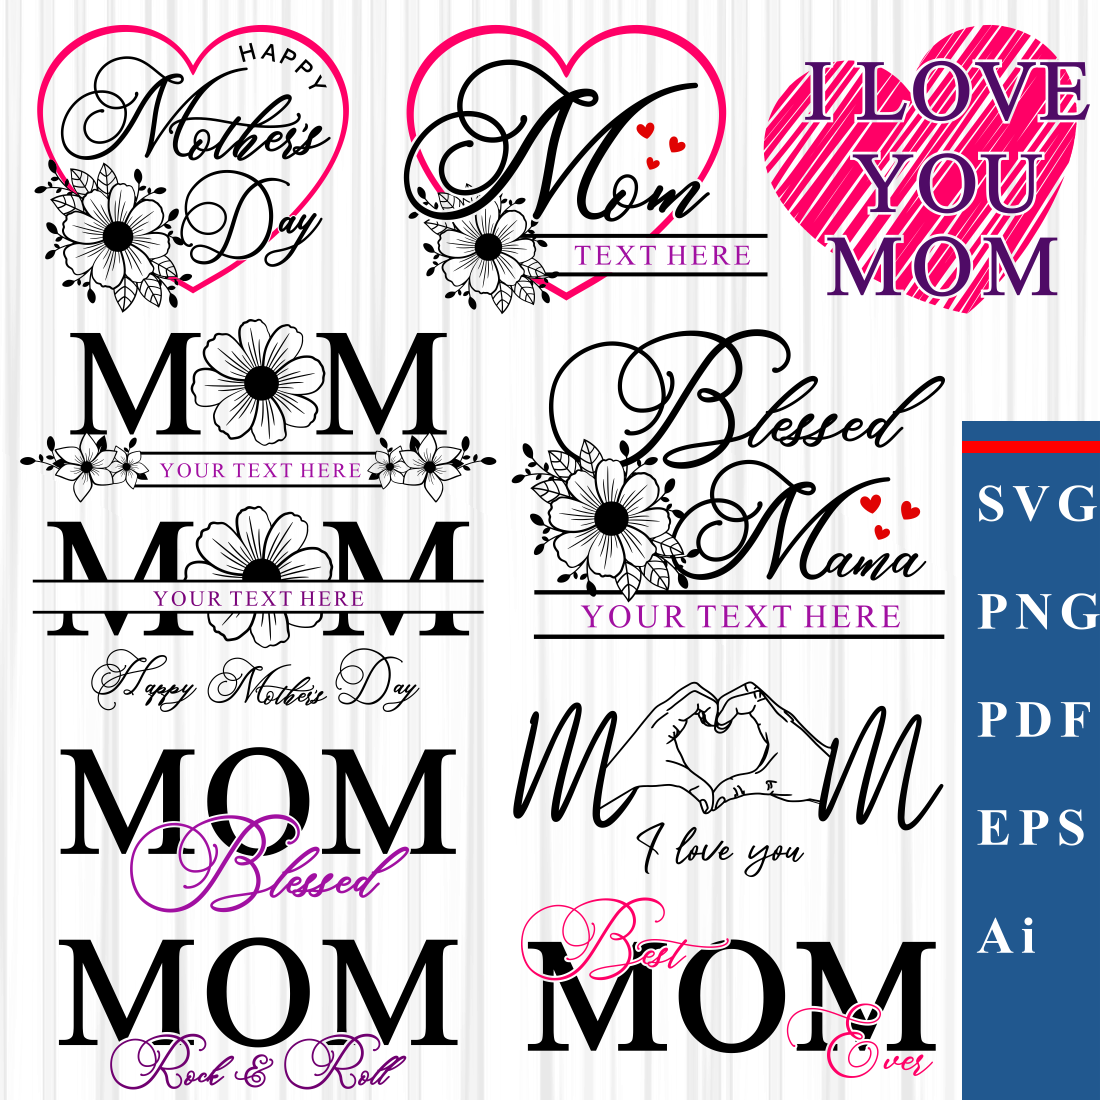 Mothers Day SVG Bundle, Mothers Day Sublimation Bundle, Quotes, Inspirational, Motivational, Mom, Sayings, Mother, Mama, Mum, Mommy, Sign, Signs, Split monogram, split, mom split, SVG File, Mom Bundle, Split Monogram, Love, I Love You, Heart, Flowers SVG, Happy Mother's Day, Keychain SVG Designs, Mug Sublimation Designs, Bundle, Sublimation, SVG Design, Designs preview image.